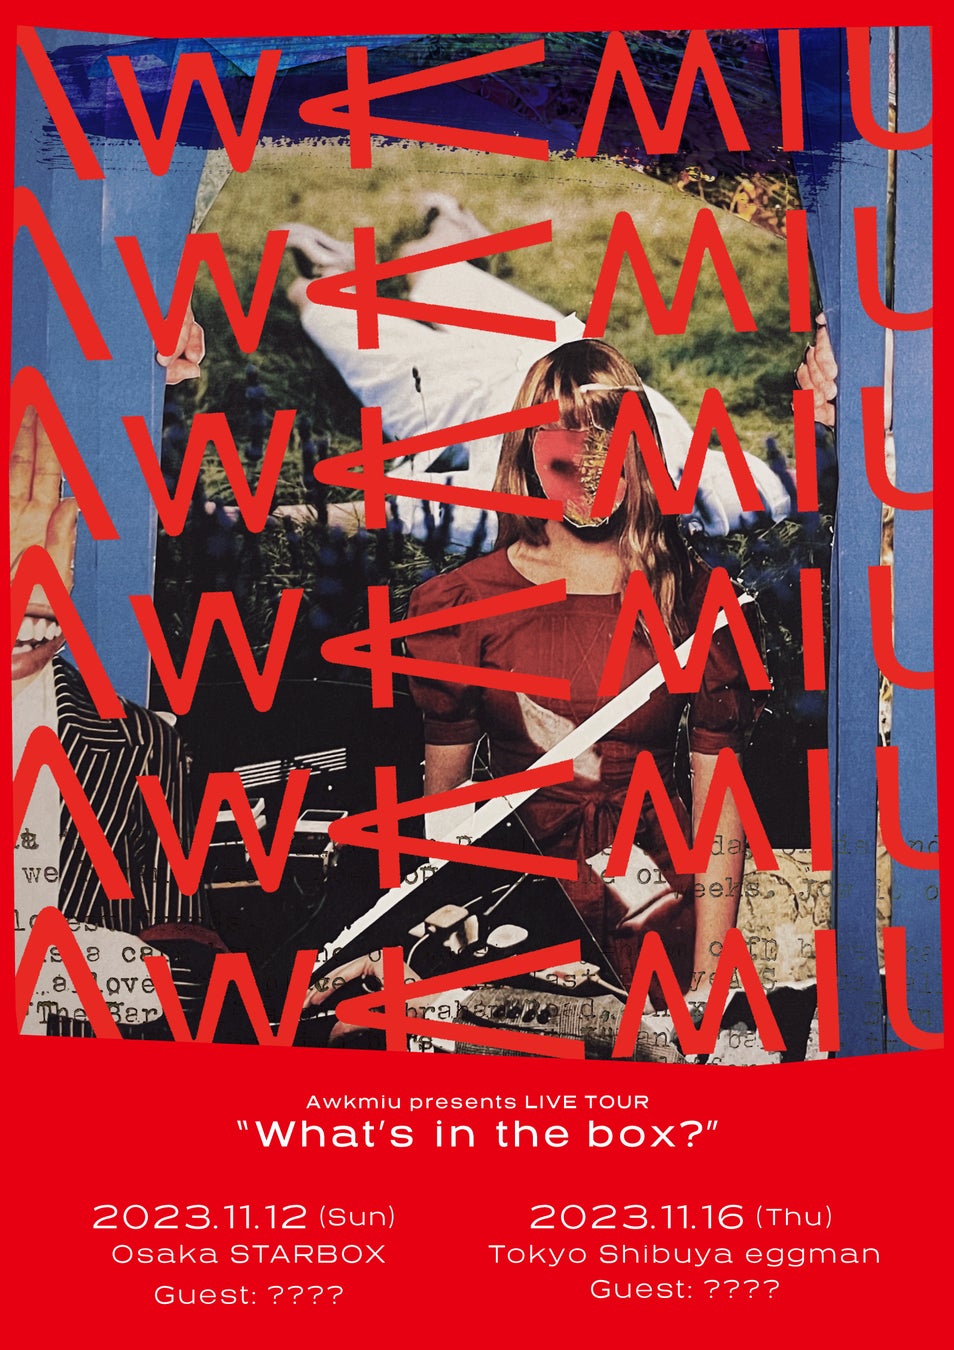 Awkmiu presents LIVE TOUR “What’s in the box?” 11月に開催決定！